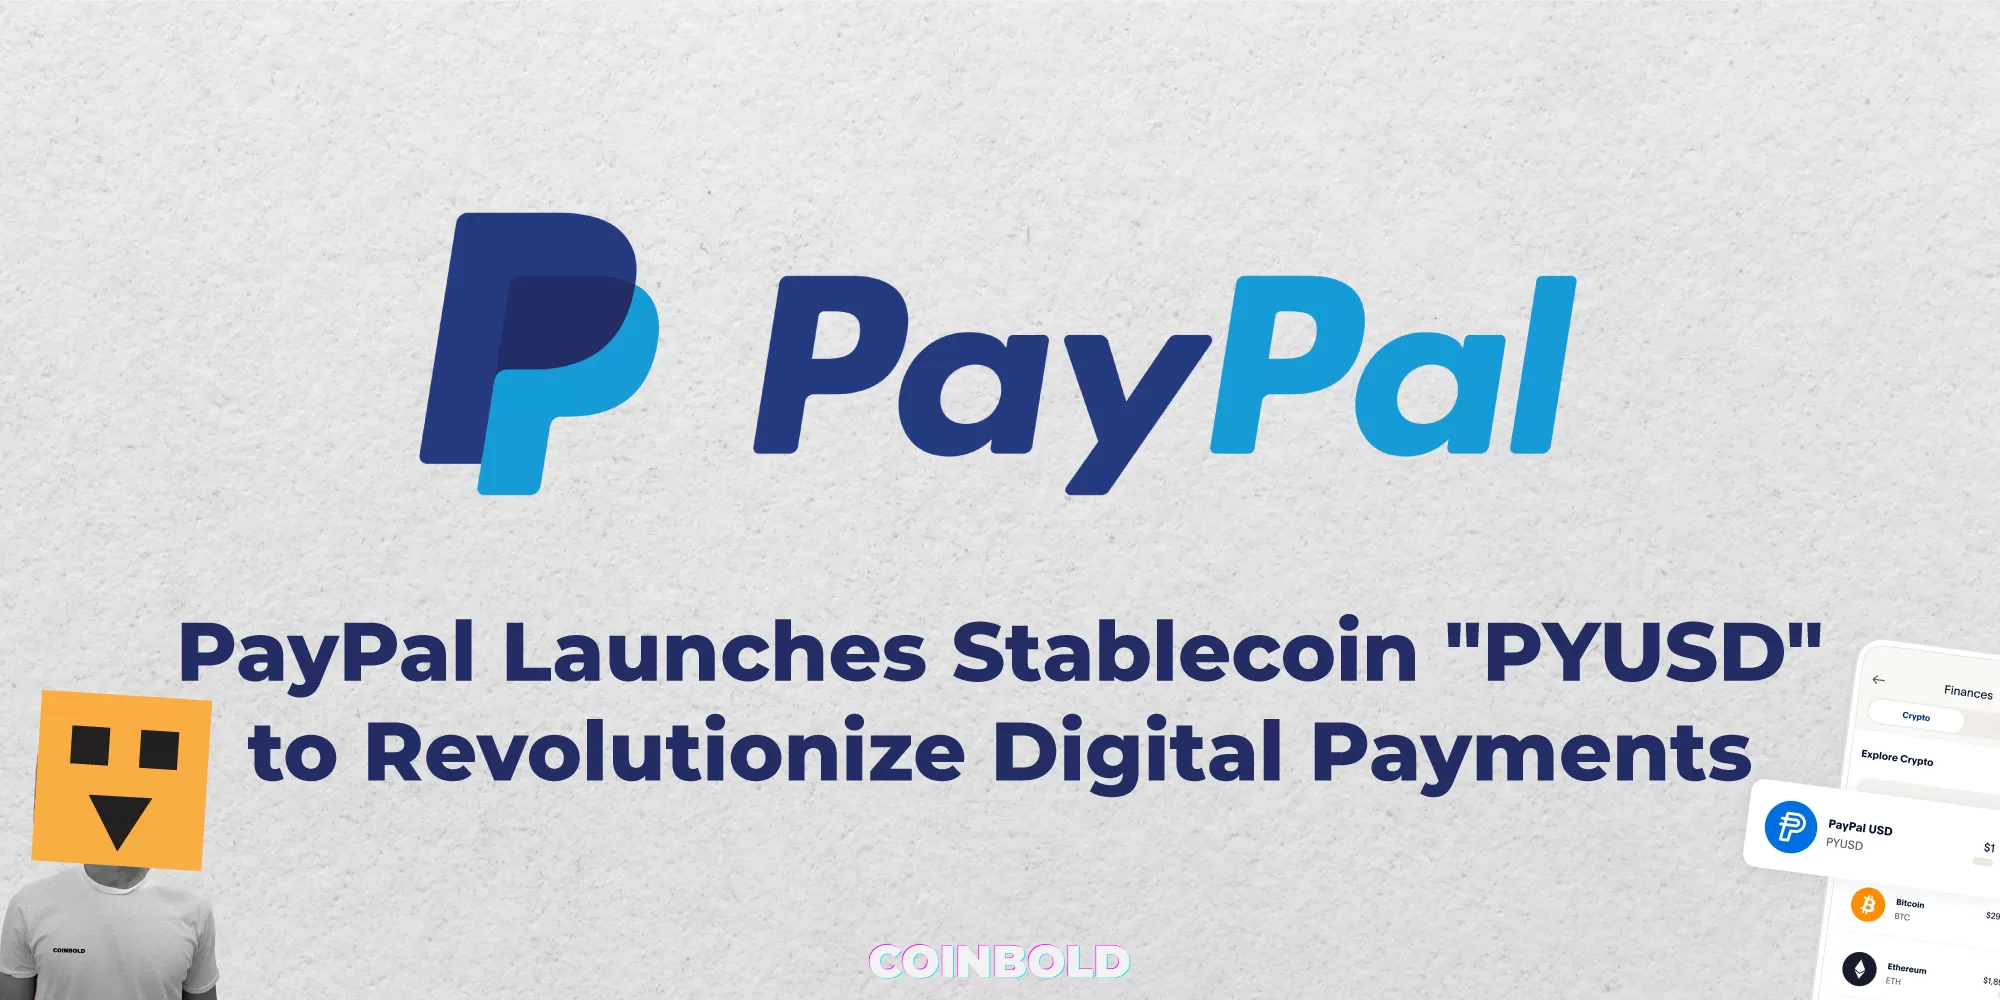 PayPal Launches Stablecoin PYUSD to Revolutionize Digital Payments